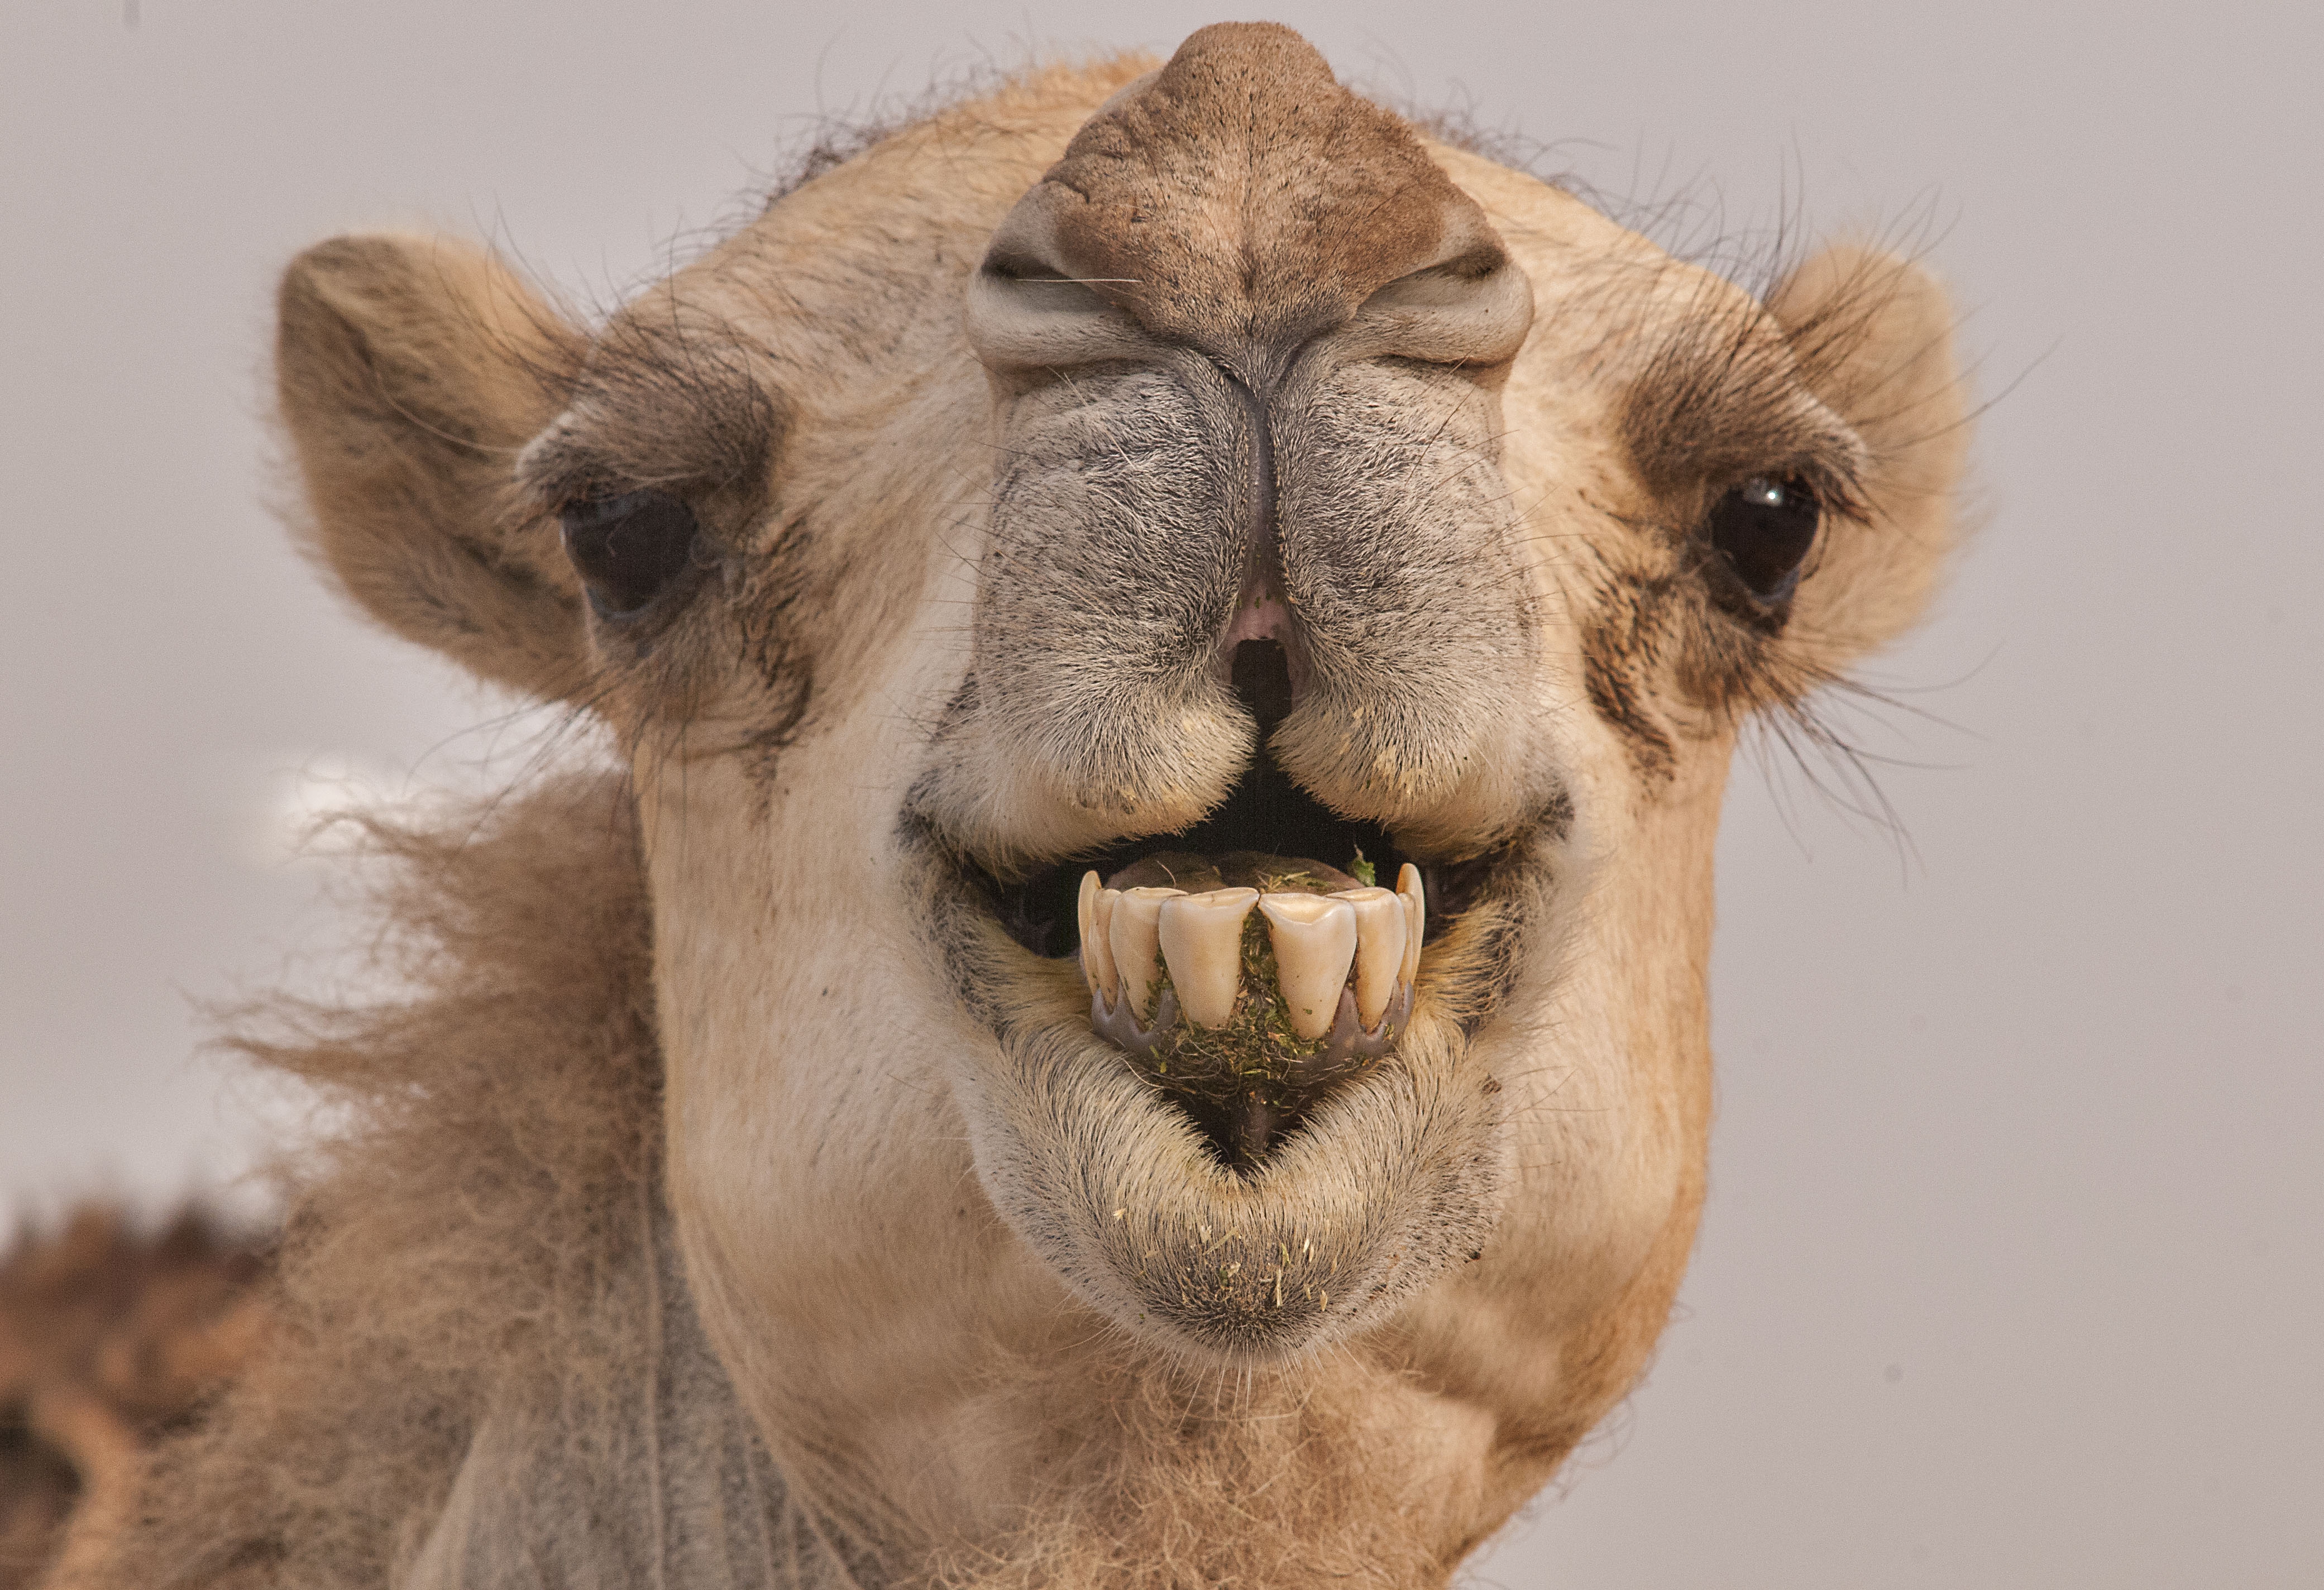 Camel Wallpaper Image Photos Pictures Background